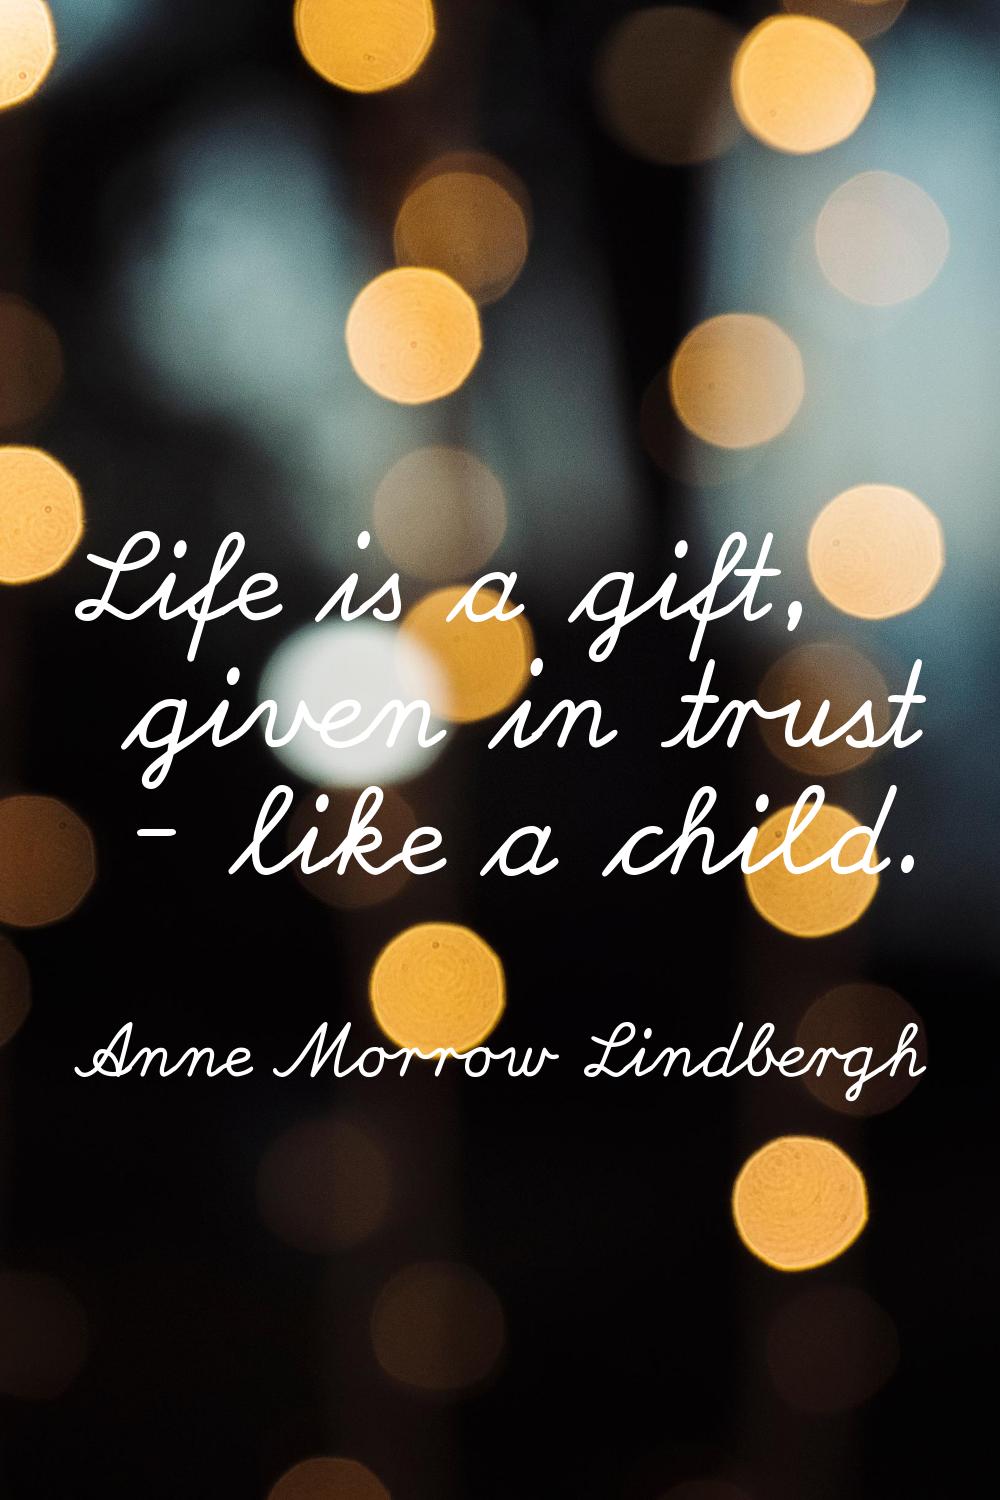 Life is a gift, given in trust - like a child.